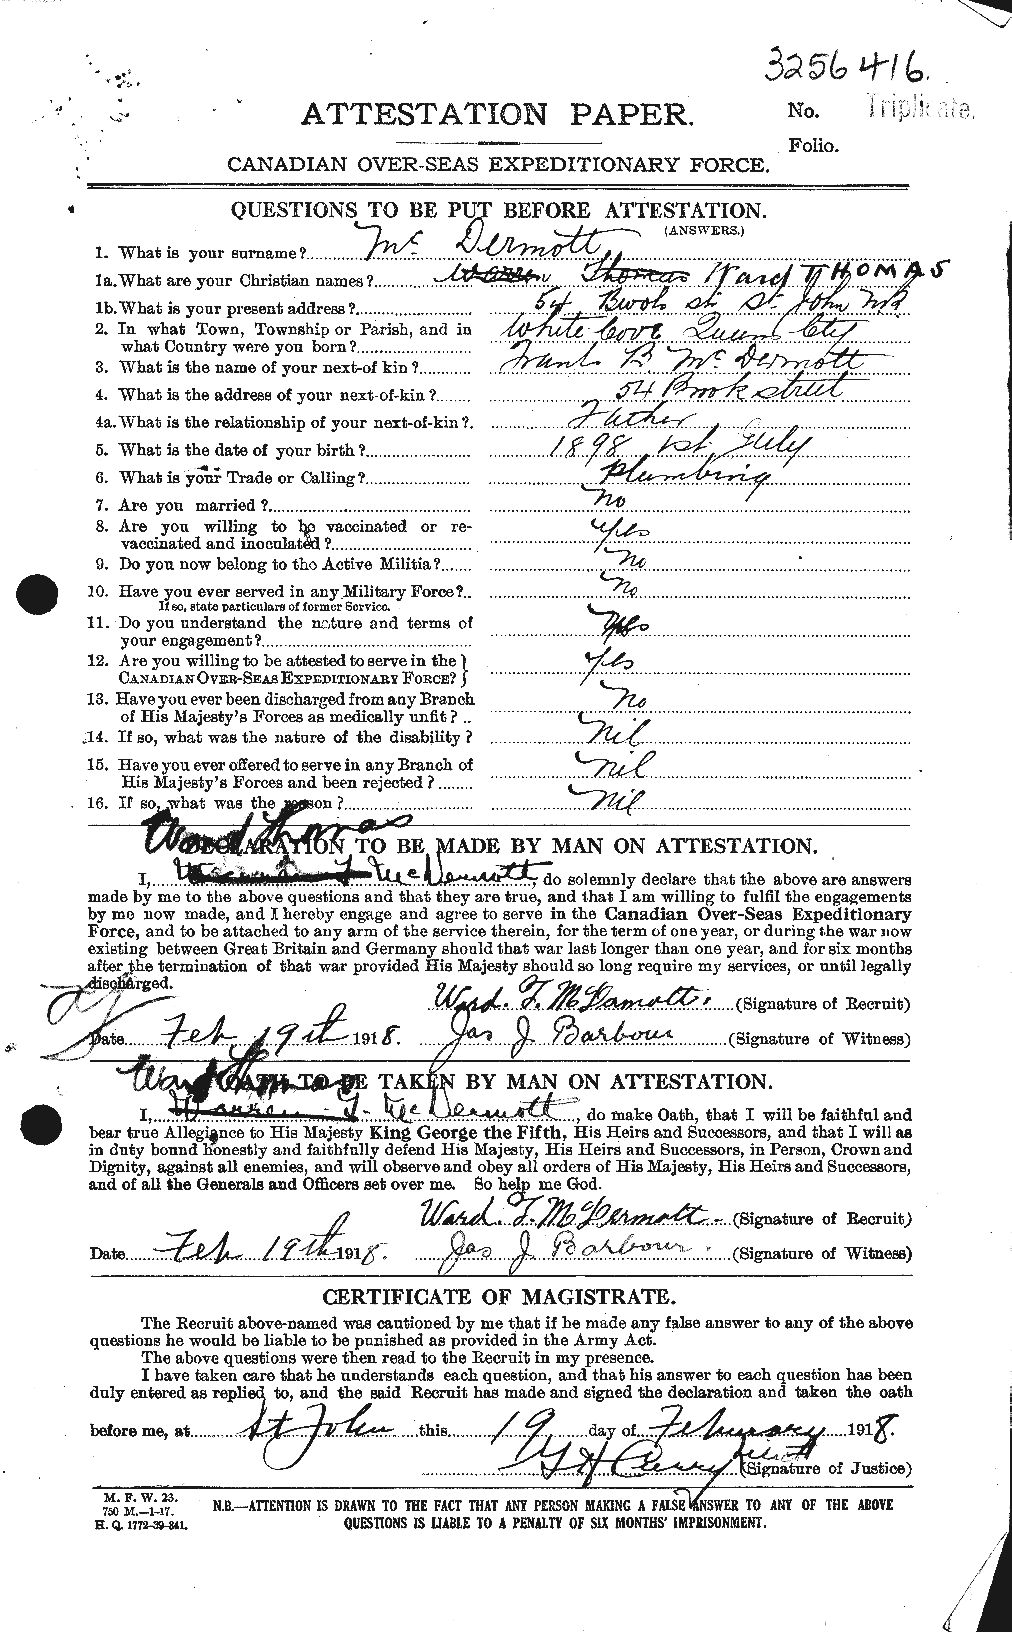 Personnel Records of the First World War - CEF 517096a